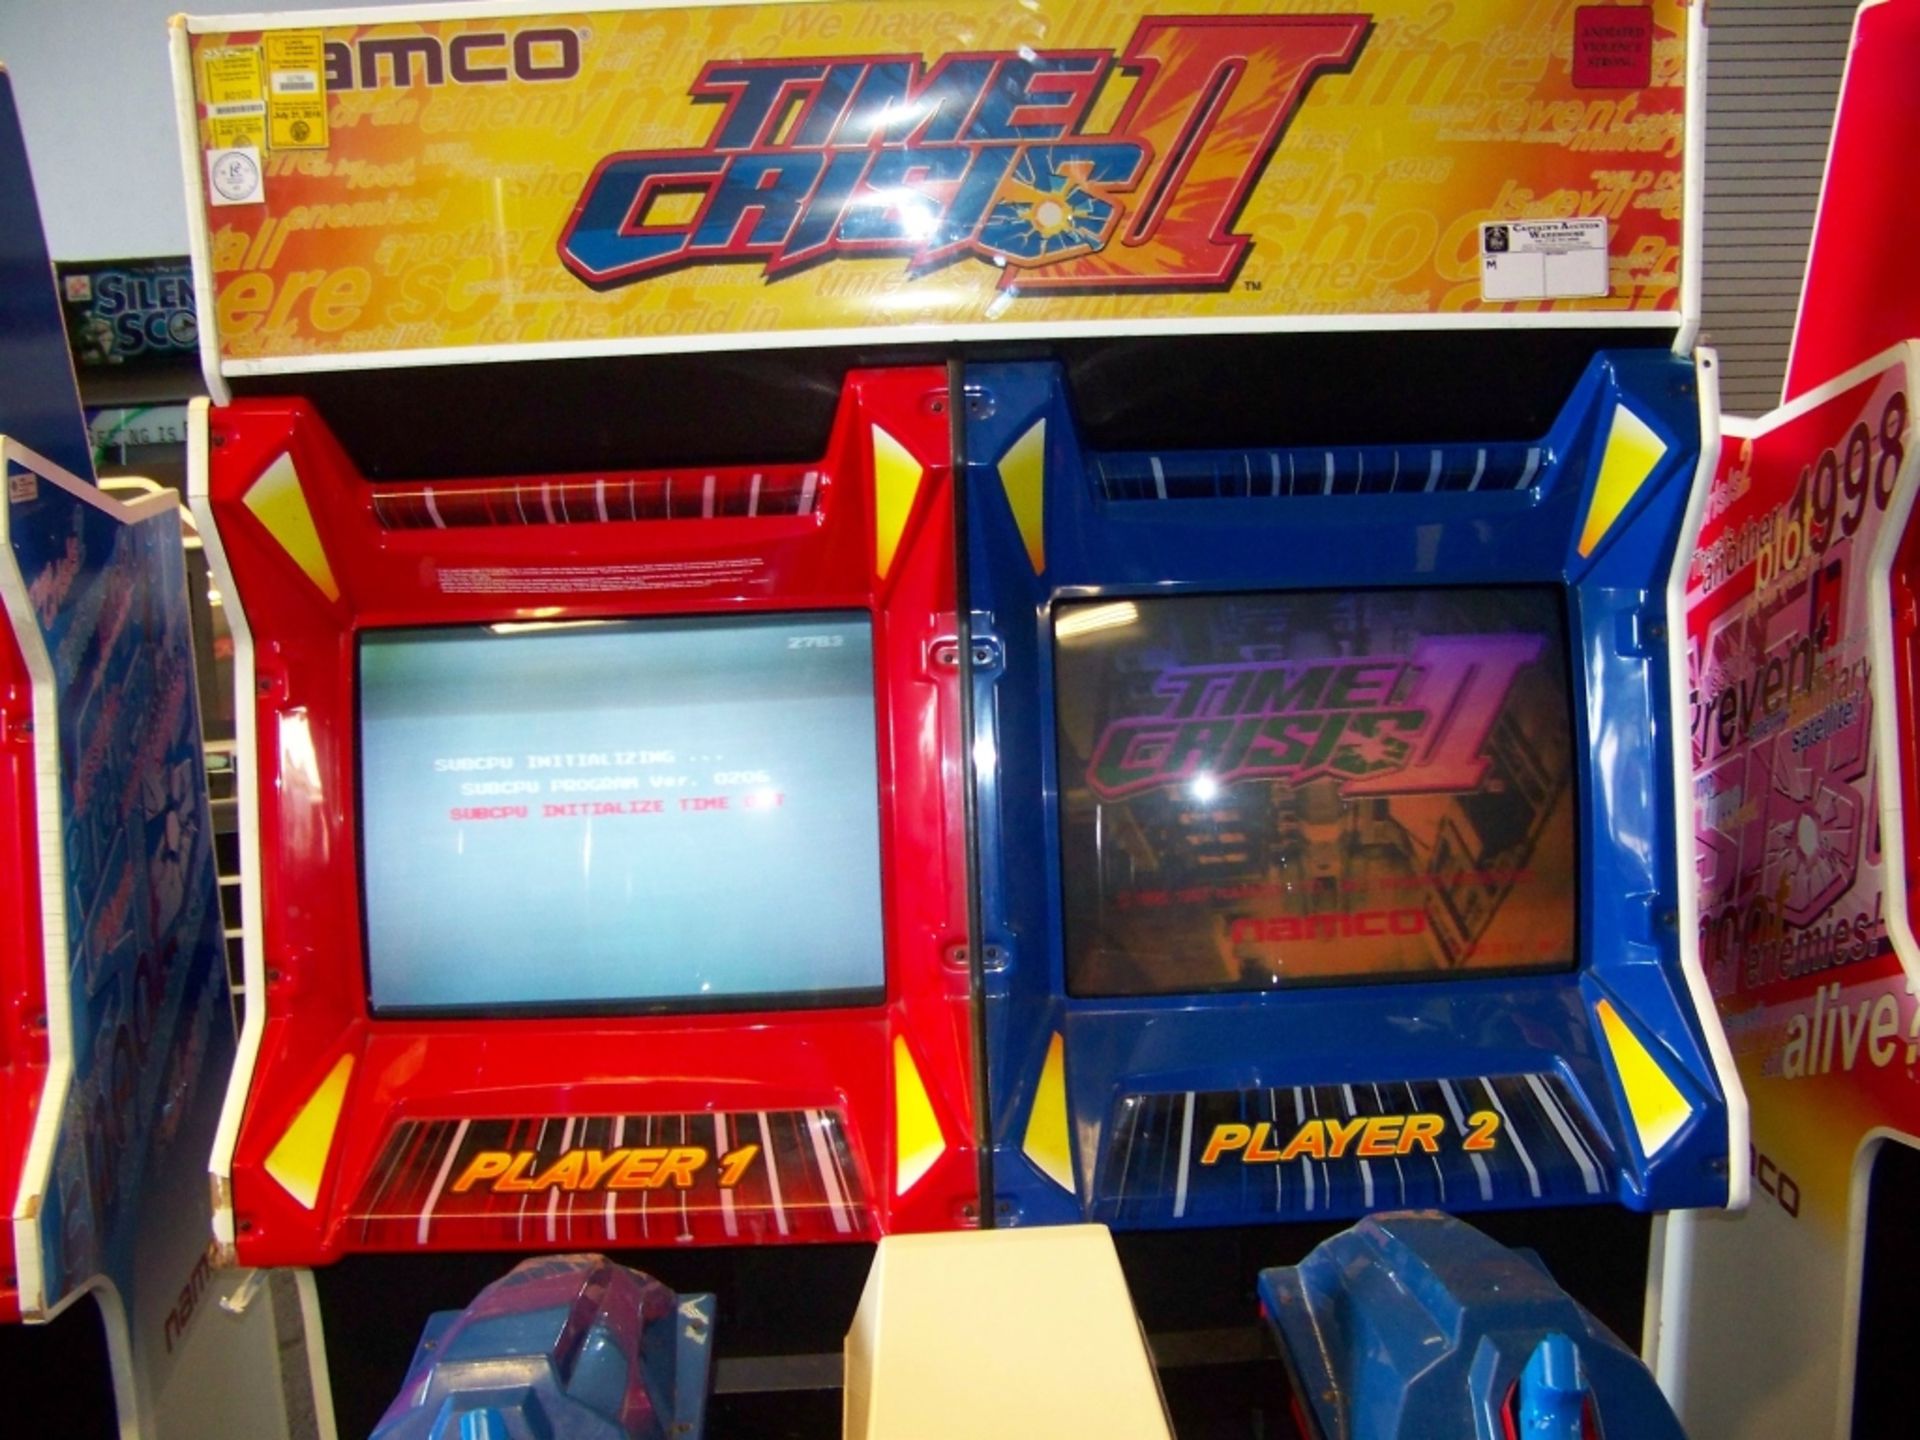 TIME CRISIS II DUAL SHOOTER ARCADE GAME NAMCO Item is in used condition. Evidence of wear and - Image 2 of 3